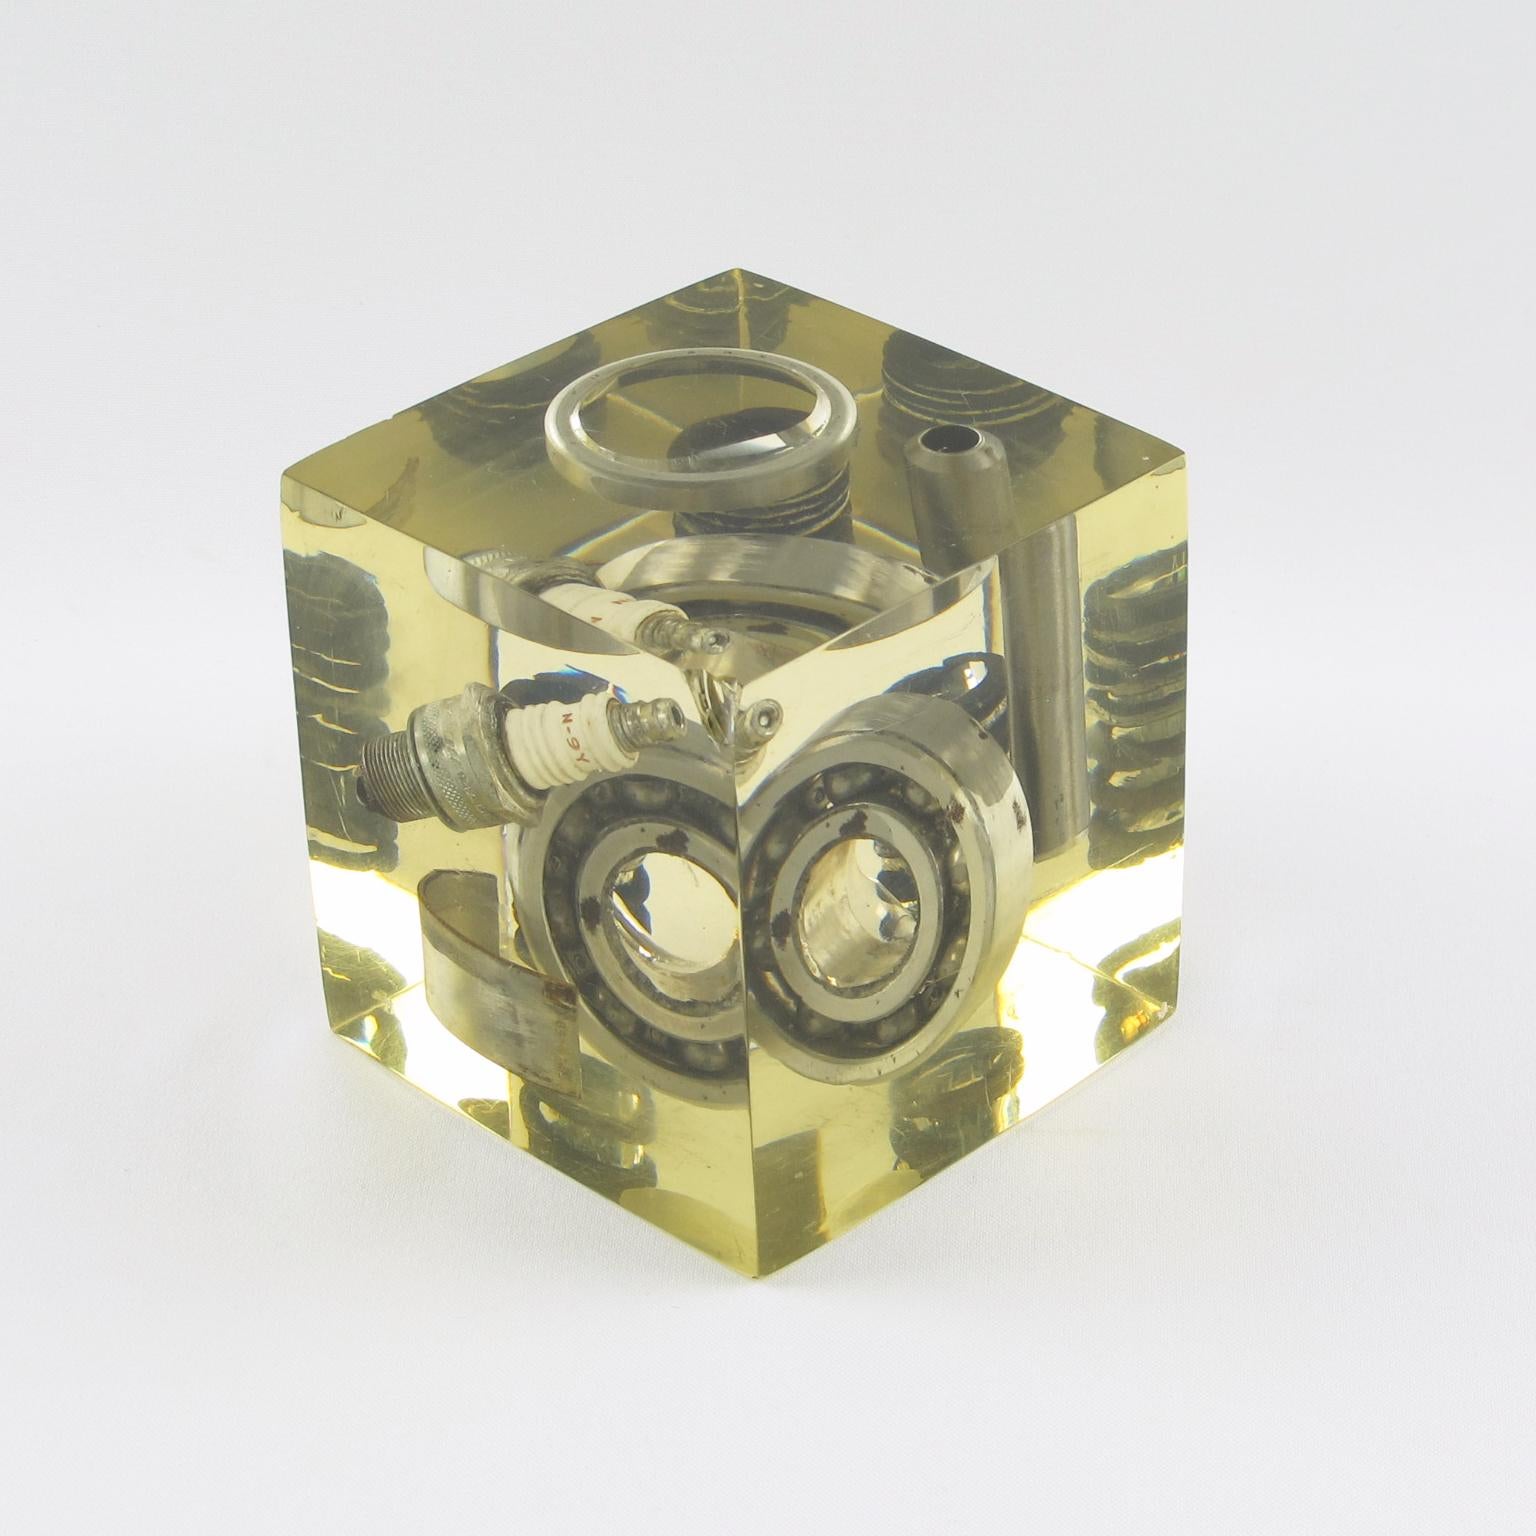 Pierre Giraudon Resin Cube Sculpture Paperweight with Car Parts Inclusions 1970s For Sale 3